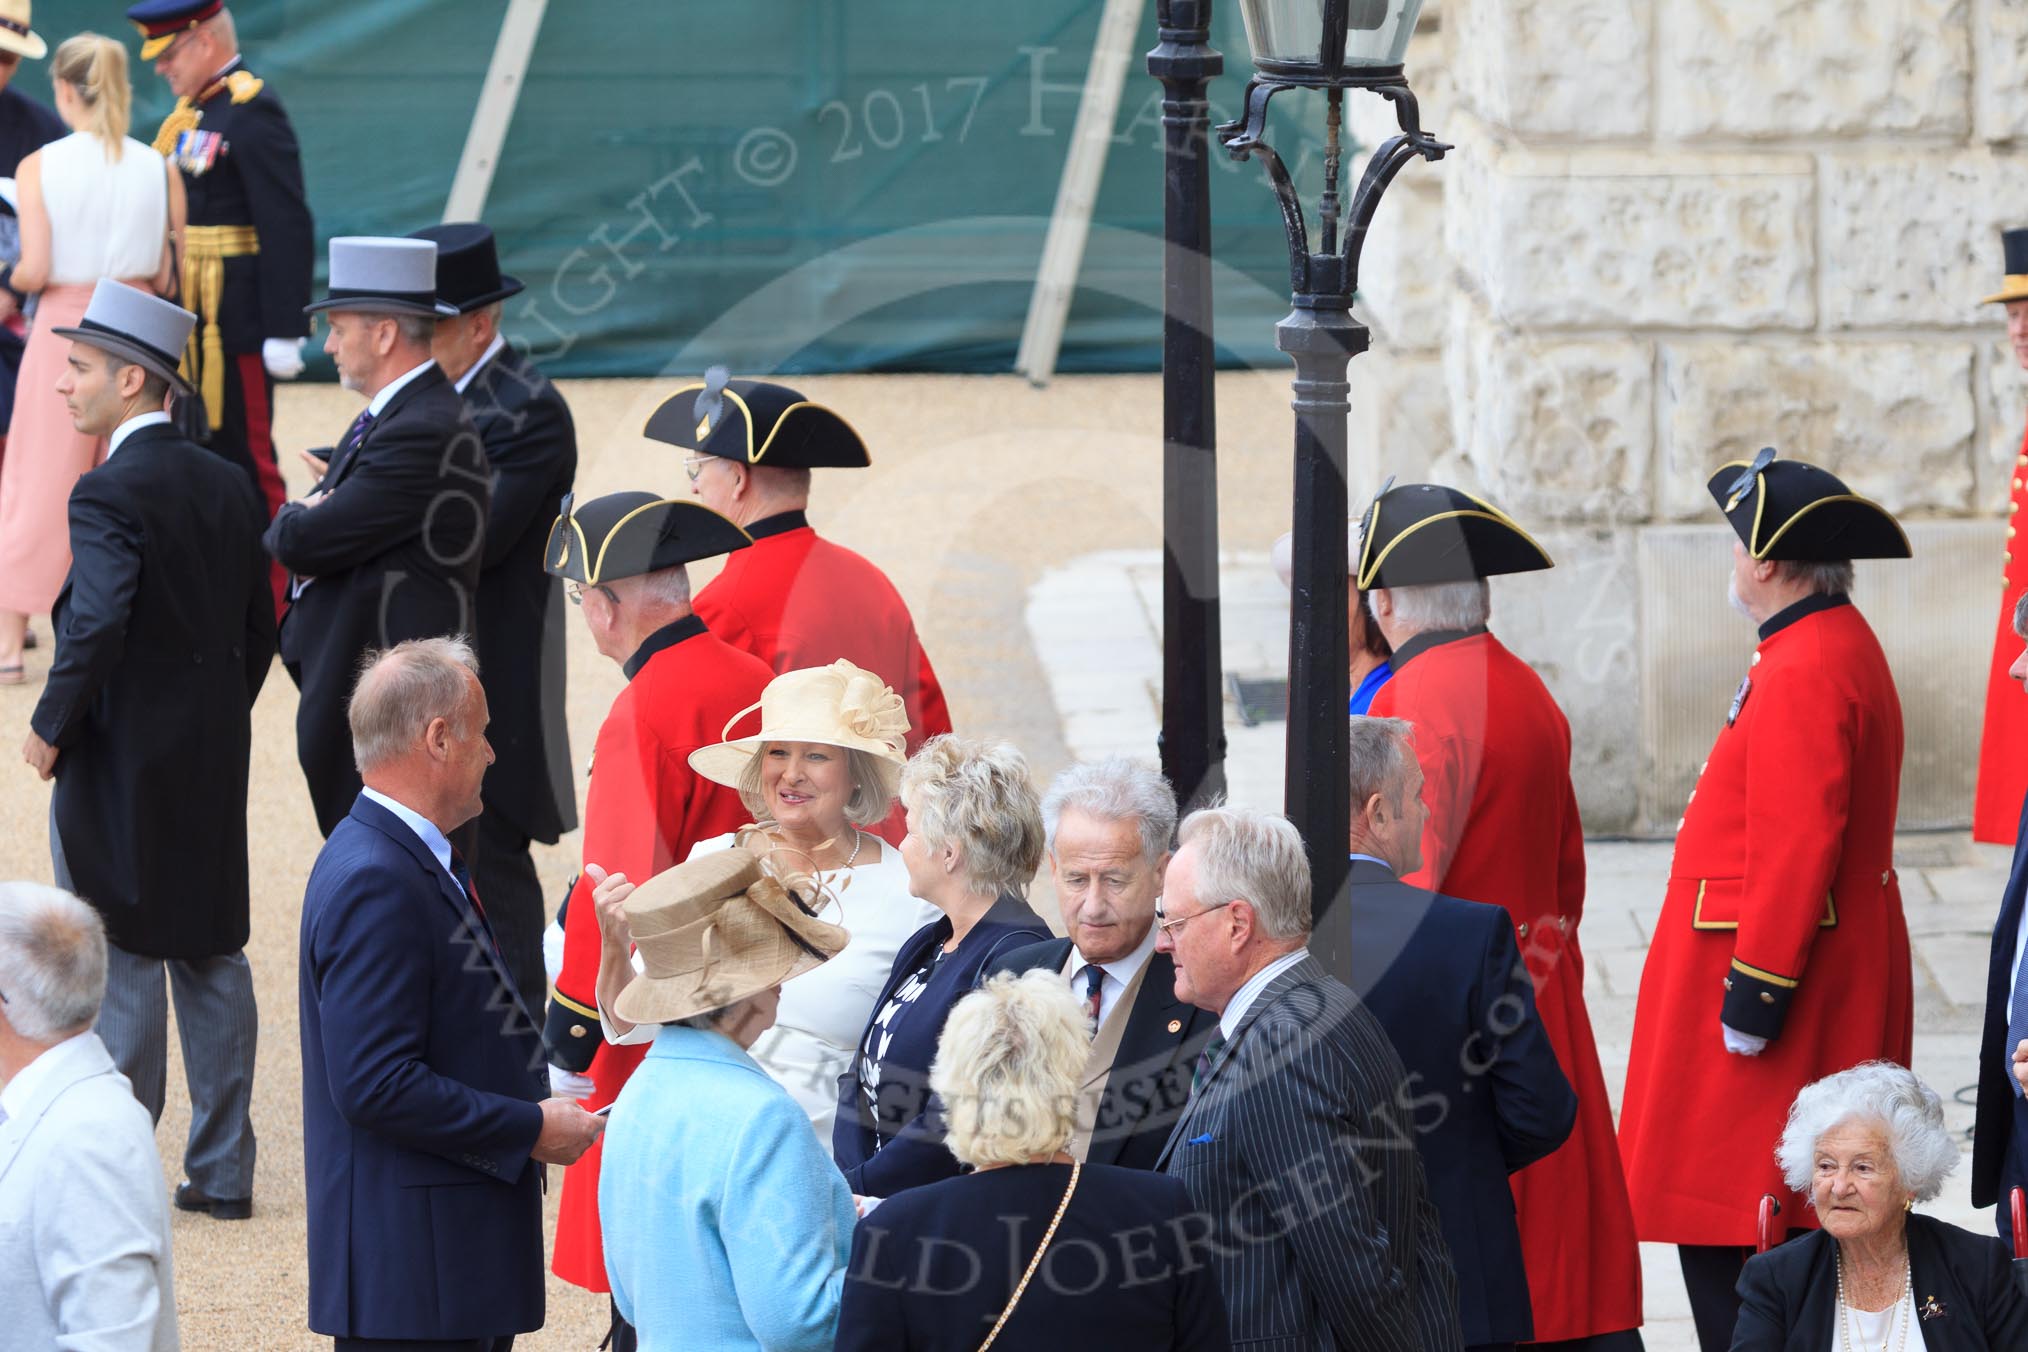 A group of Chelsea Pensioners arriving for Trooping the Colour 2018, The Queen's Birthday Parade at Horse Guards Parade, Westminster, London, 9 June 2018, 09:29.